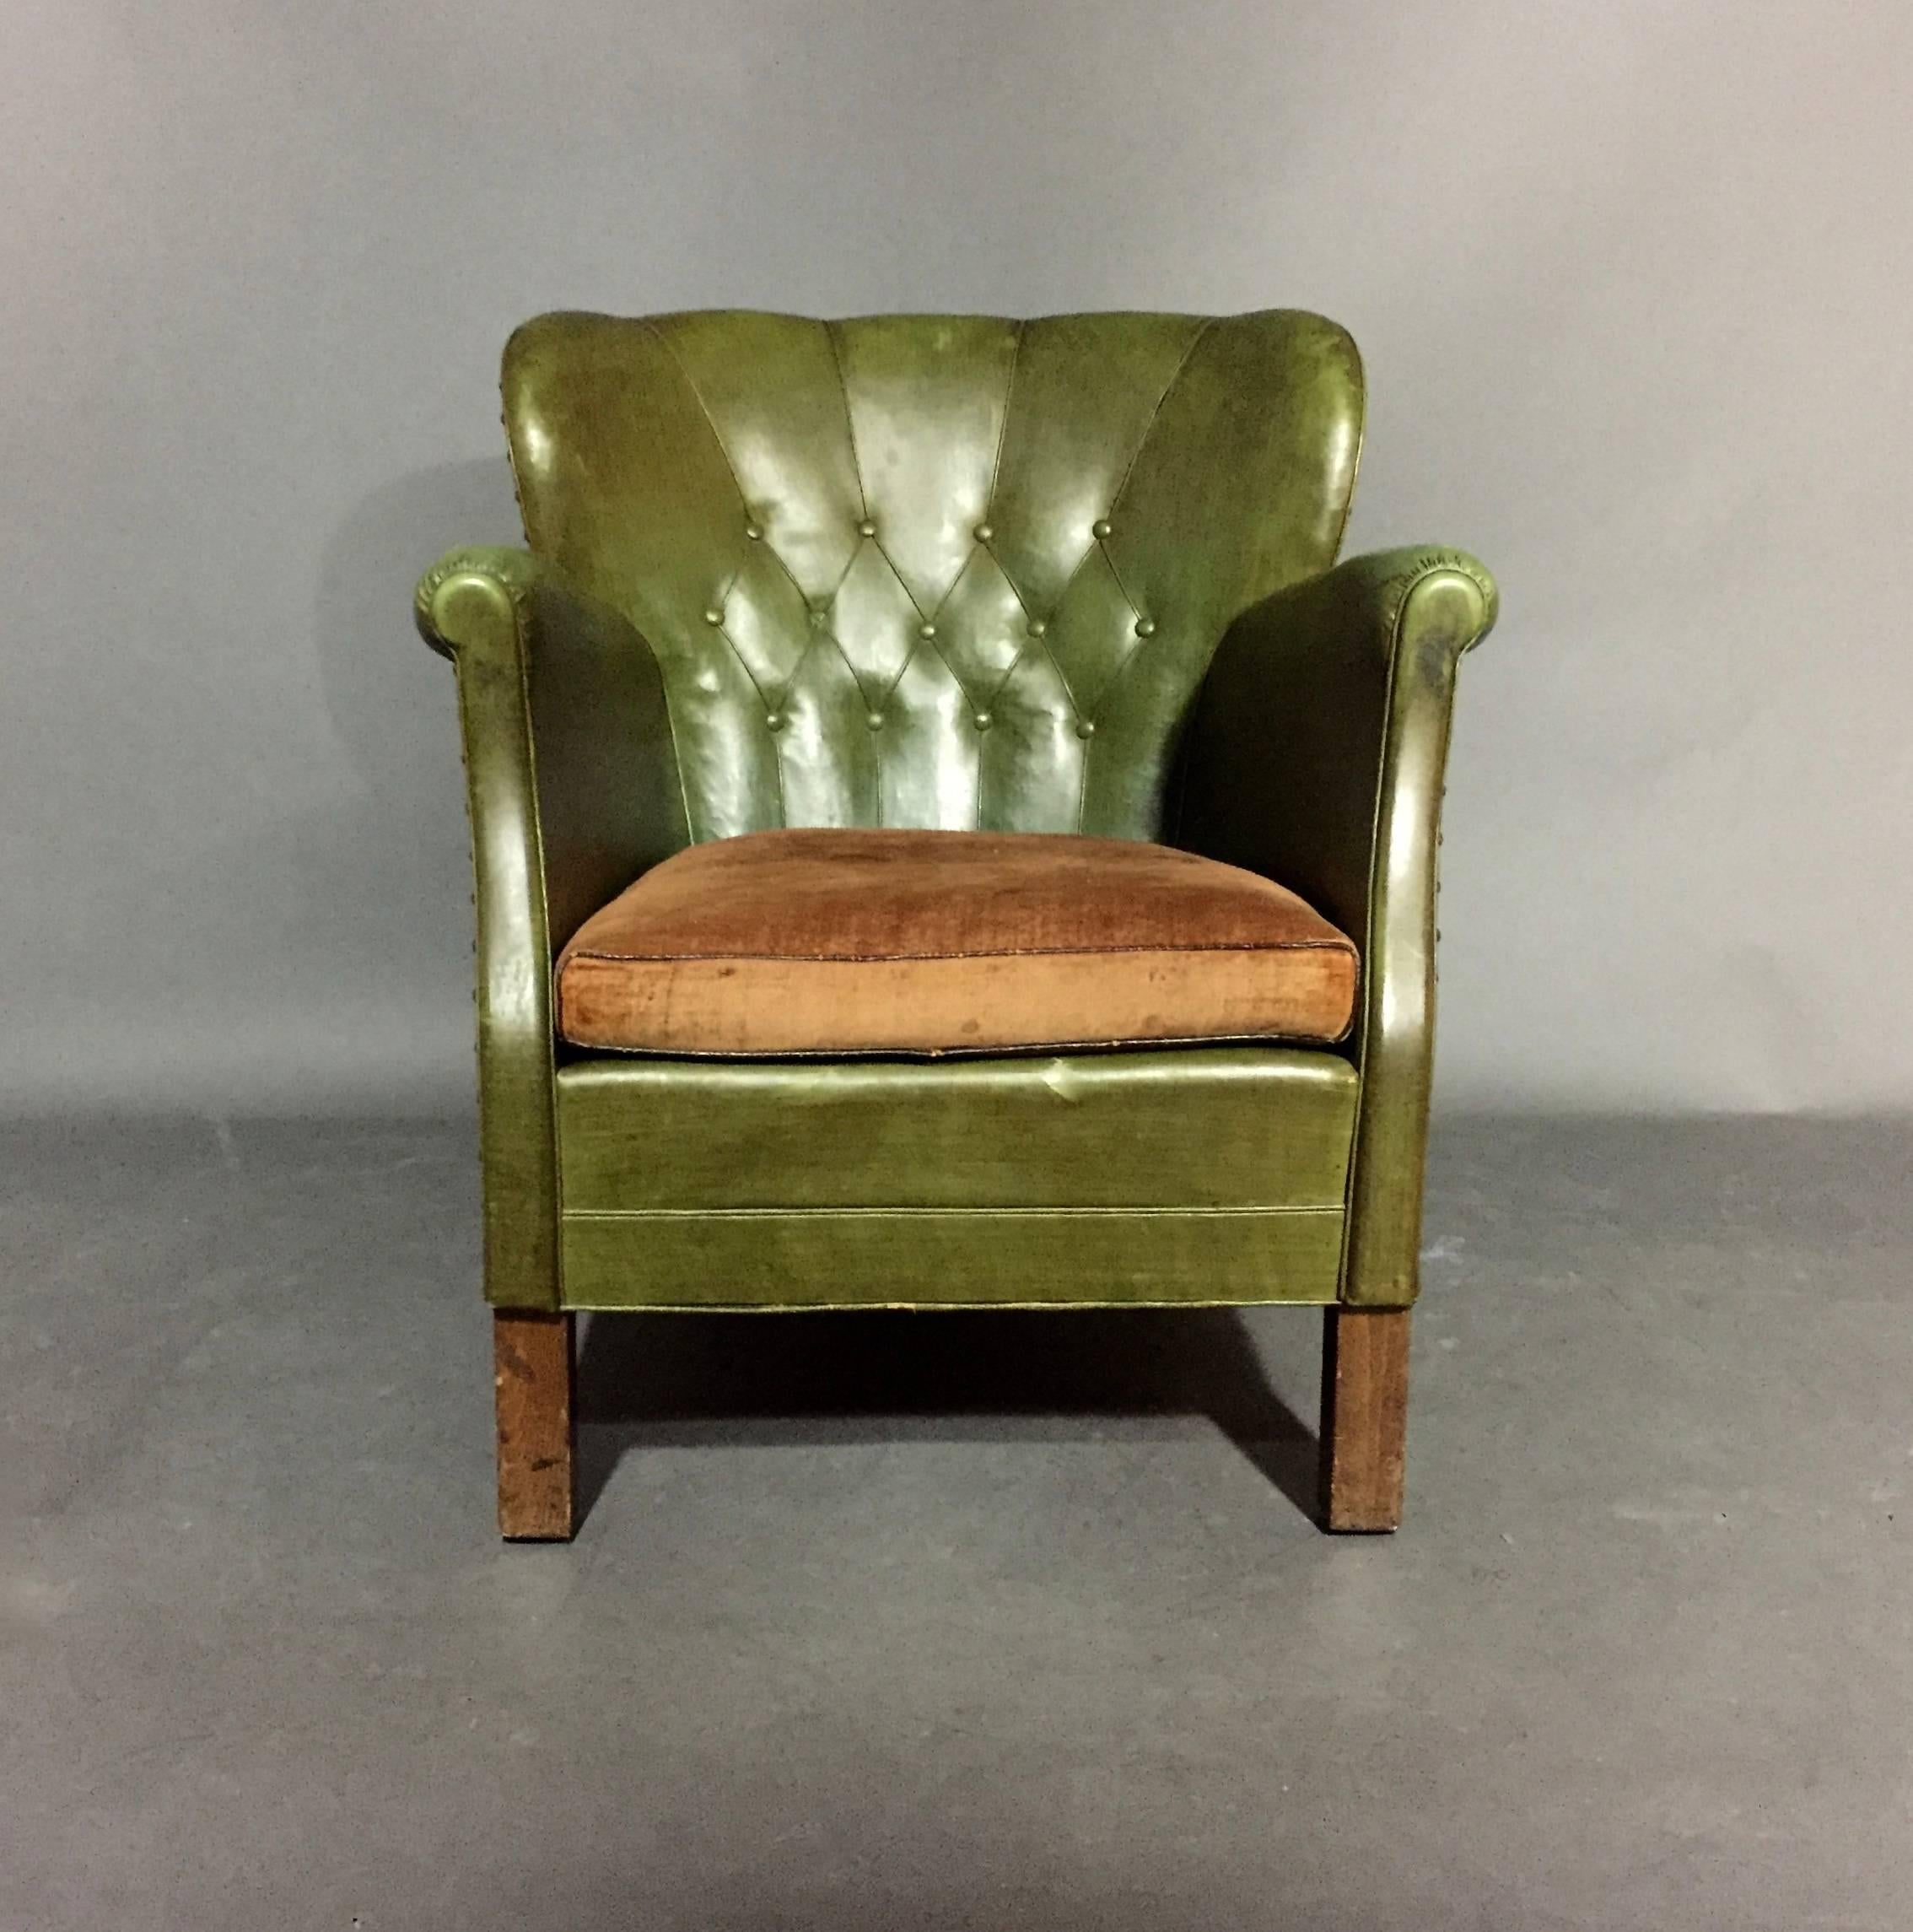 We try to buy these whenever we see them the in Denmark. It’s a Classic 1940s diminutive club chair made in a large variety of leather colors and always fits perfectly into any room. This version is early and uses a less common oil cloth in luscious